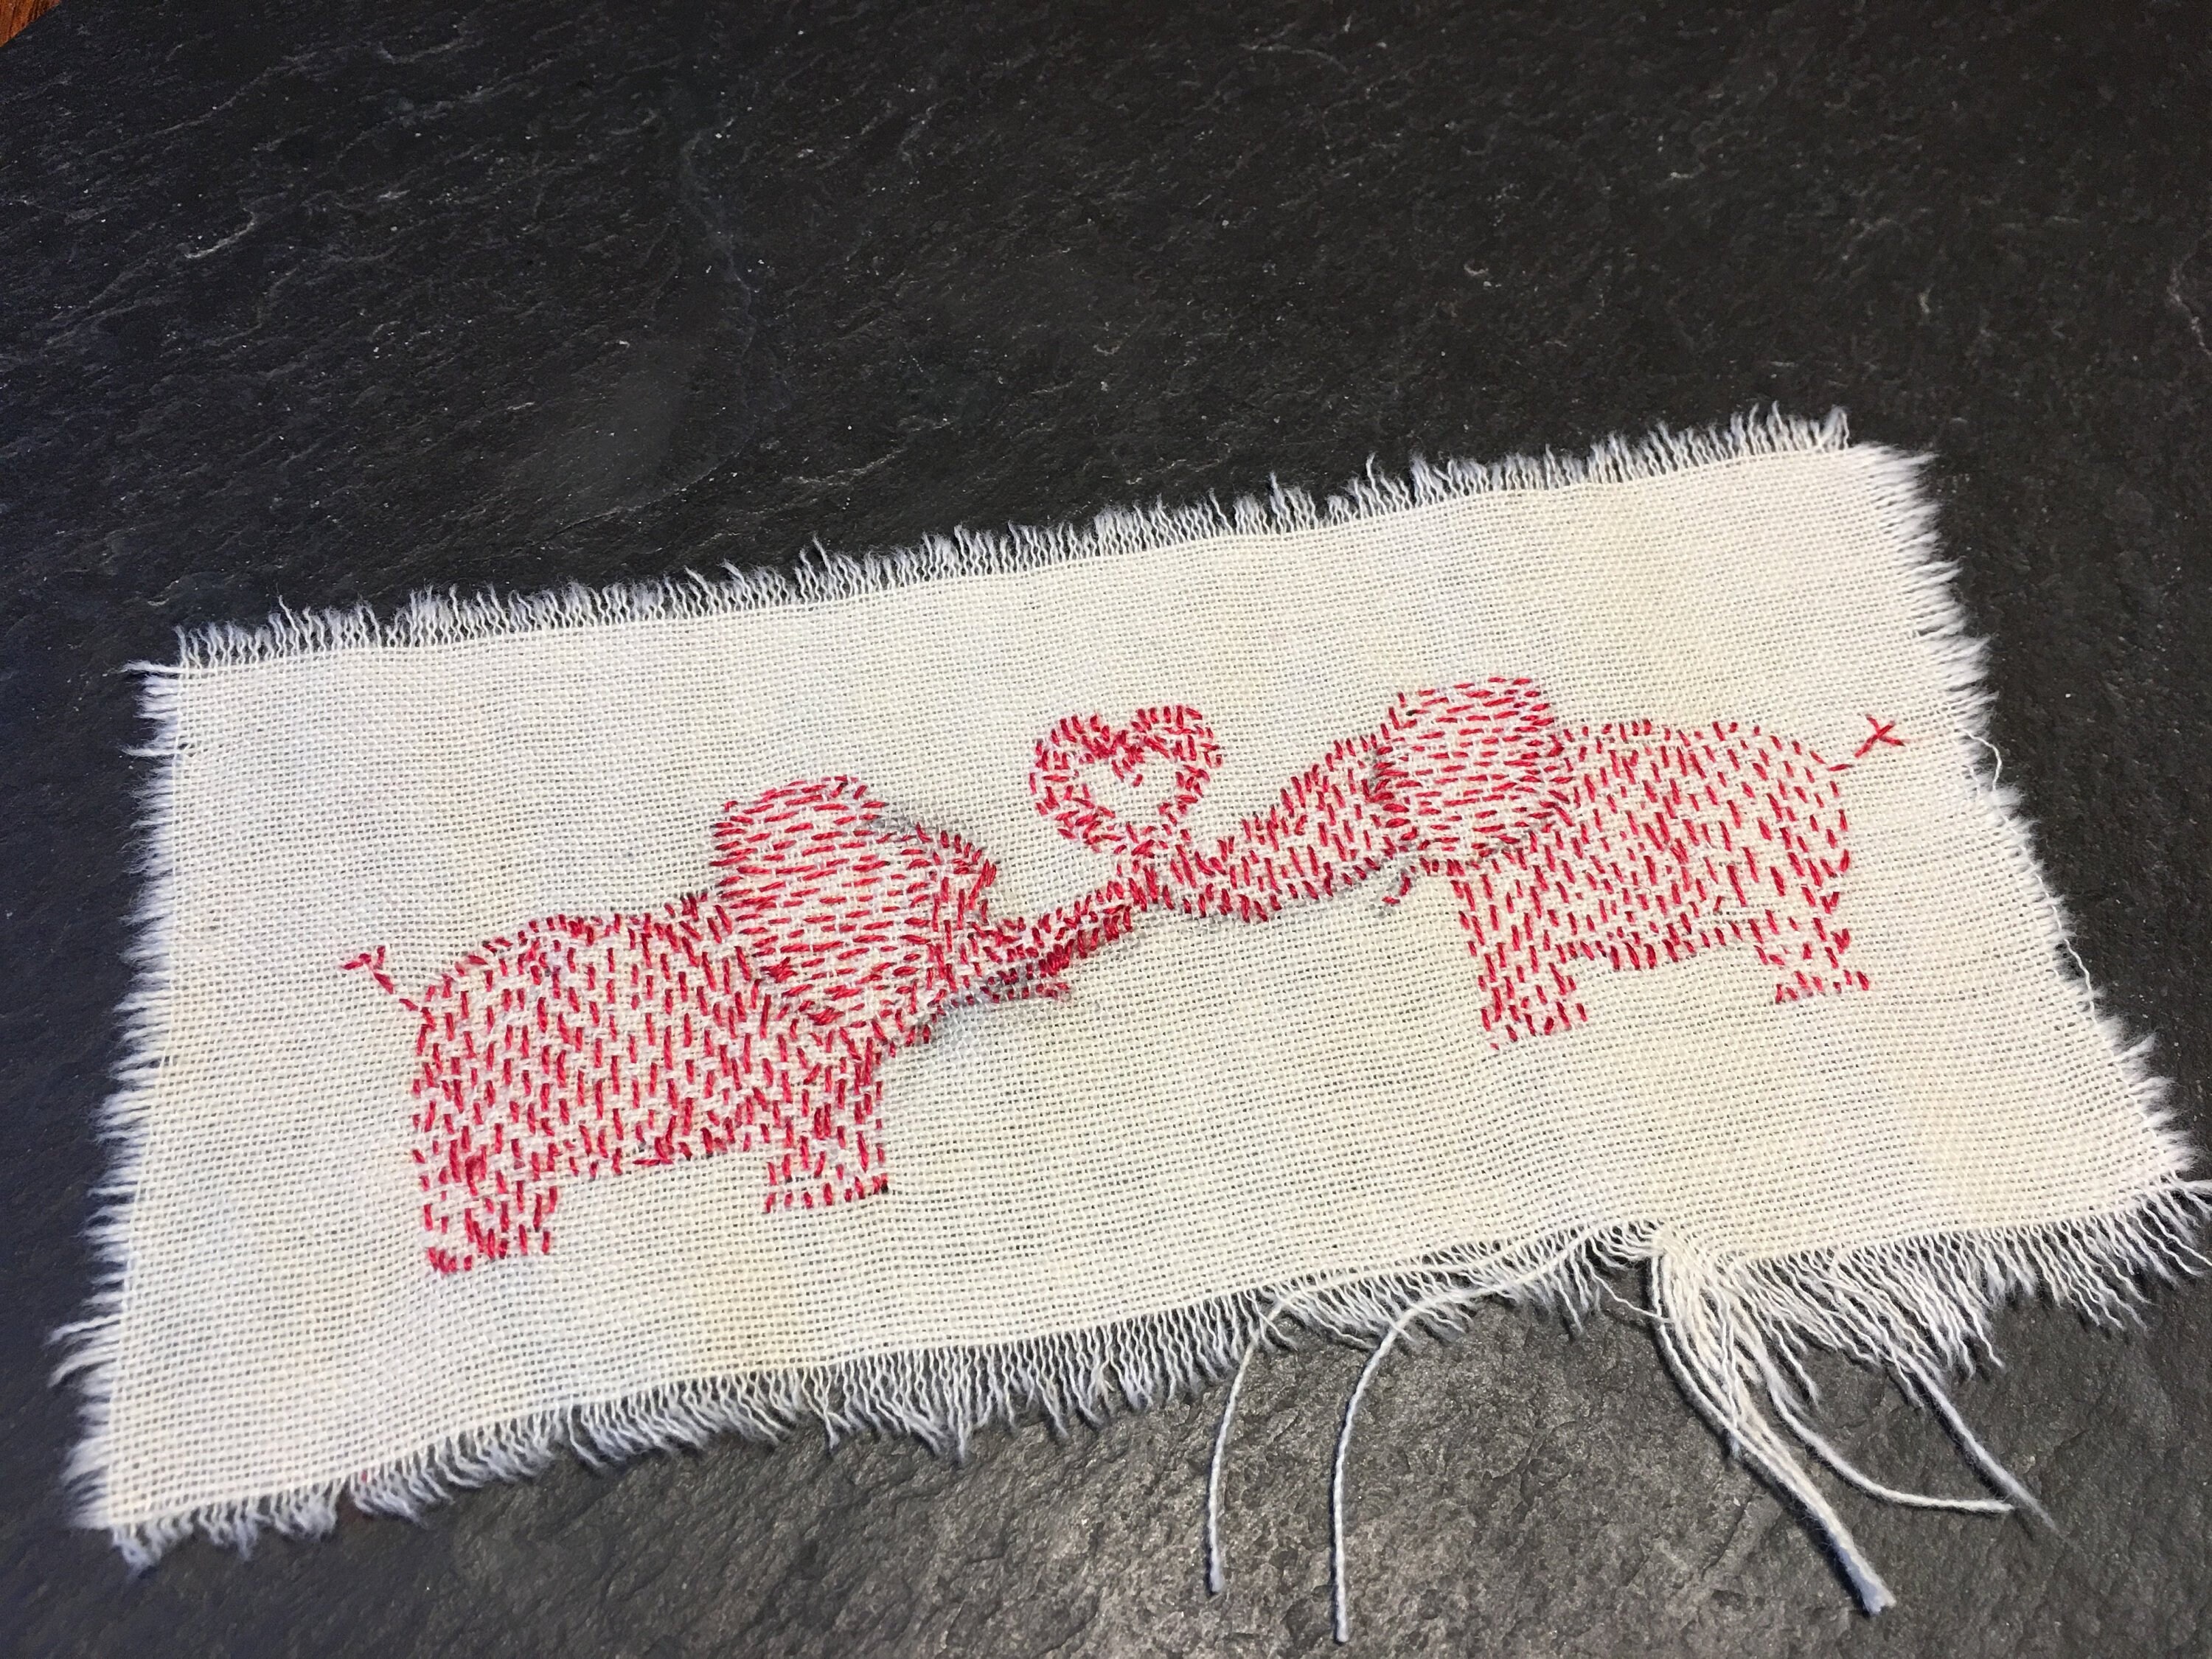 Wanted to share my Mom's latest slow stitch art work. Hope you like it! All  done on fabric with needle and silk embroidery thread : r/Embroidery